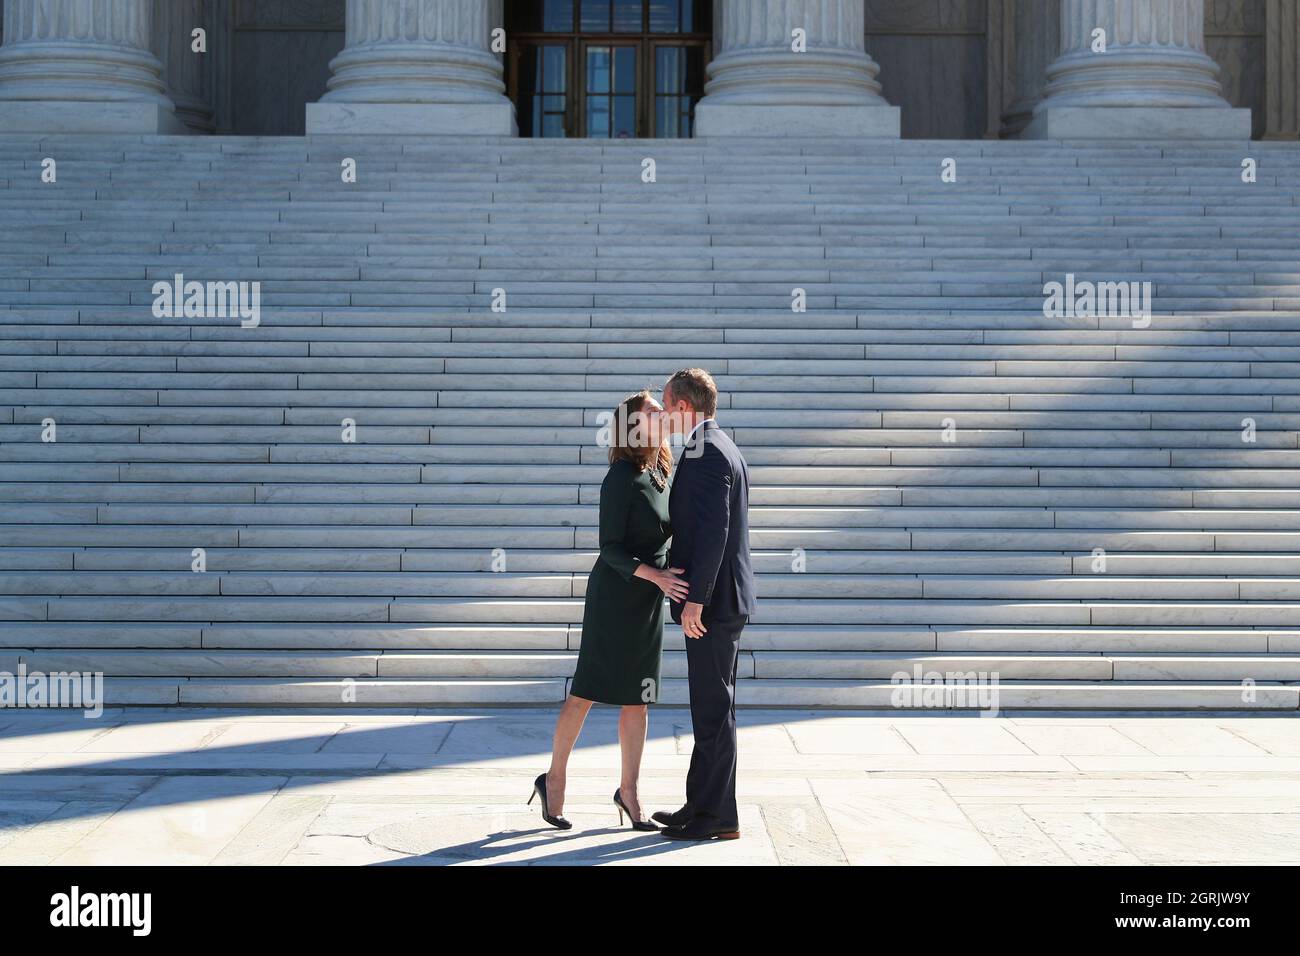 Justice Amy Coney Barrett kisses her husband, Jesse M. Barrett, following an investiture ceremony on the steps of the U.S. Supreme Court on Capitol Hill in Washington, U.S. October 1, 2021. REUTERS/Tom Brenner/ Stock Photo